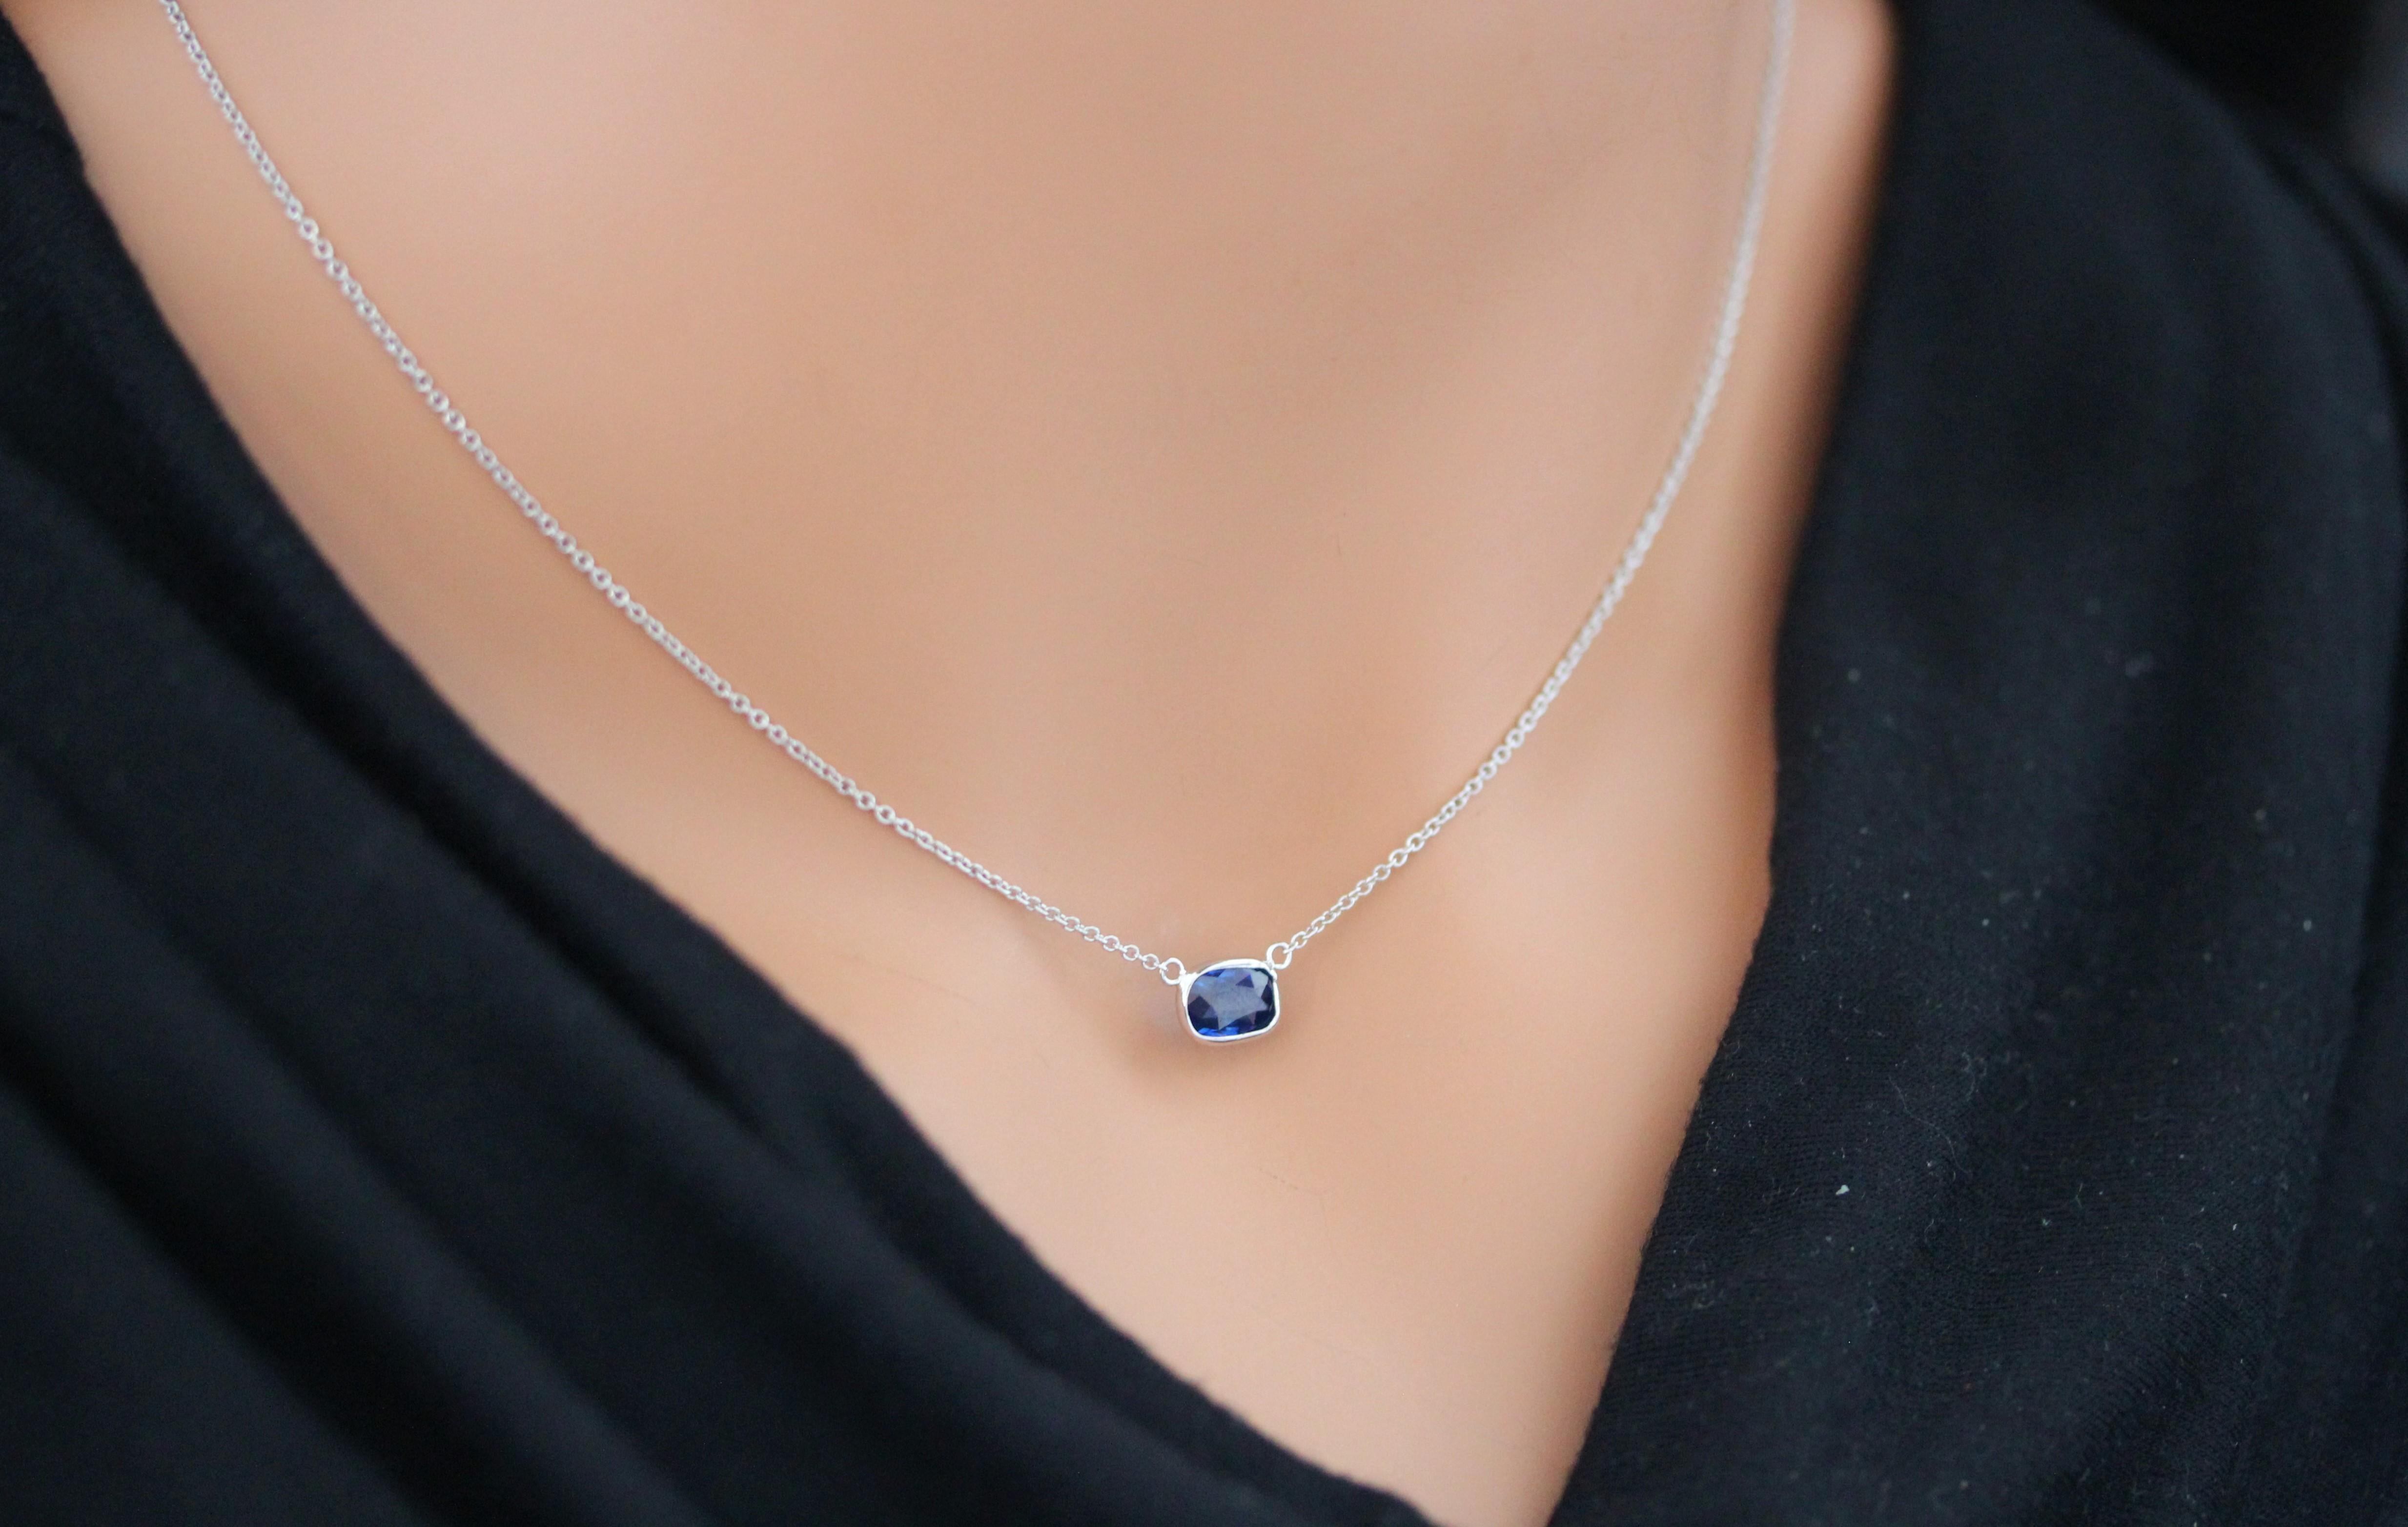 Cushion Cut 1.56 Carat Cushion Sapphire Blue Fashion Necklaces In 14k White Gold For Sale